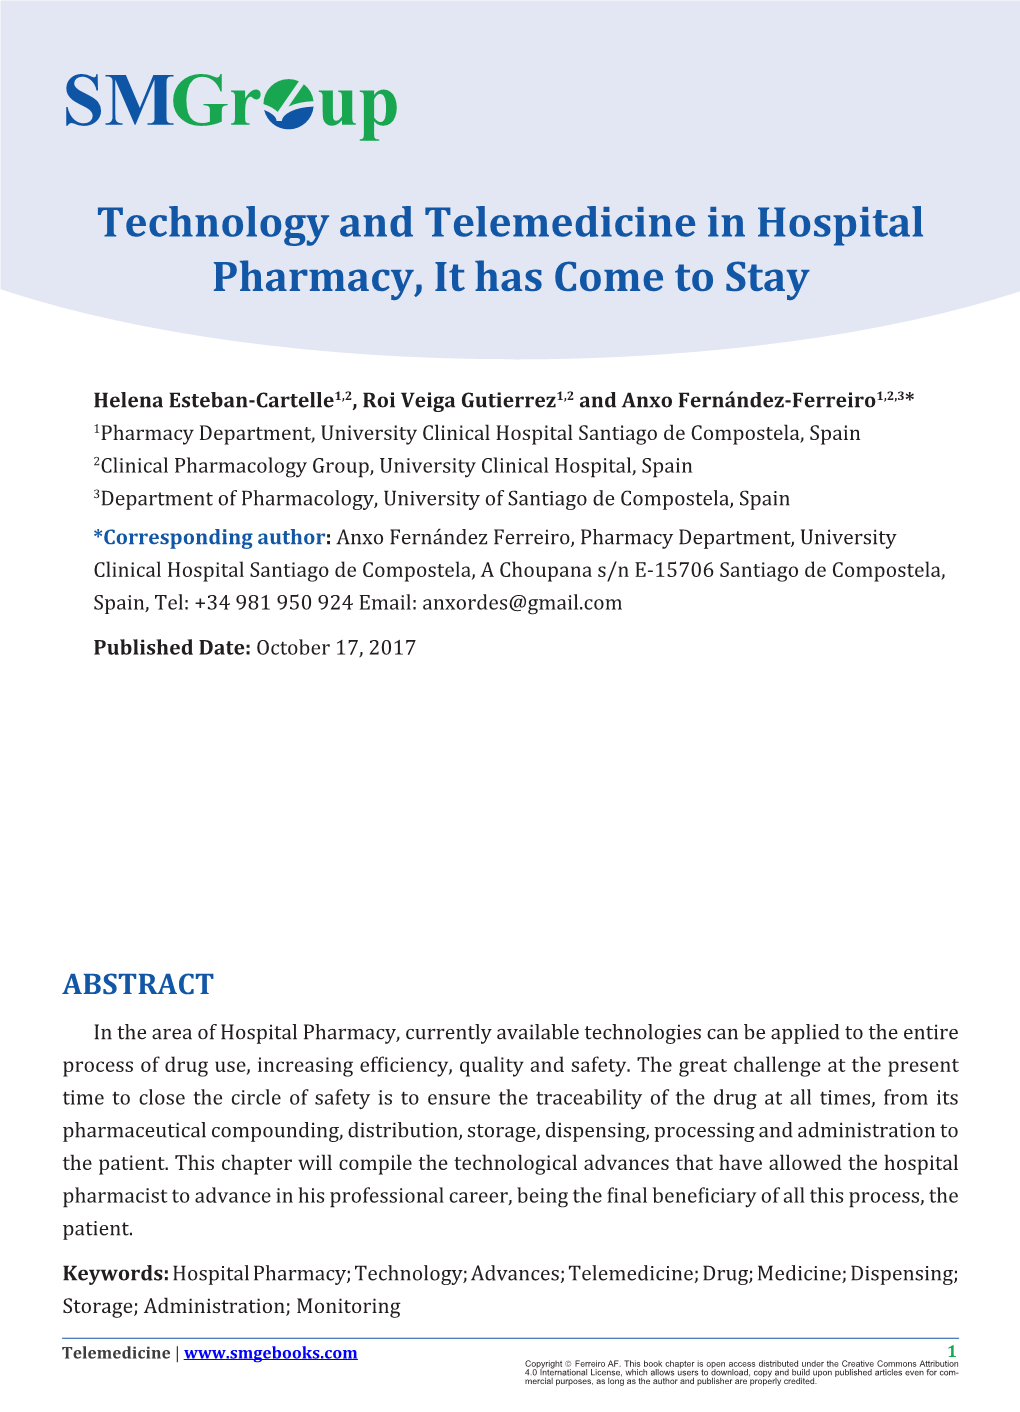 Technology and Telemedicine in Hospital Pharmacy, It Has Come to Stay